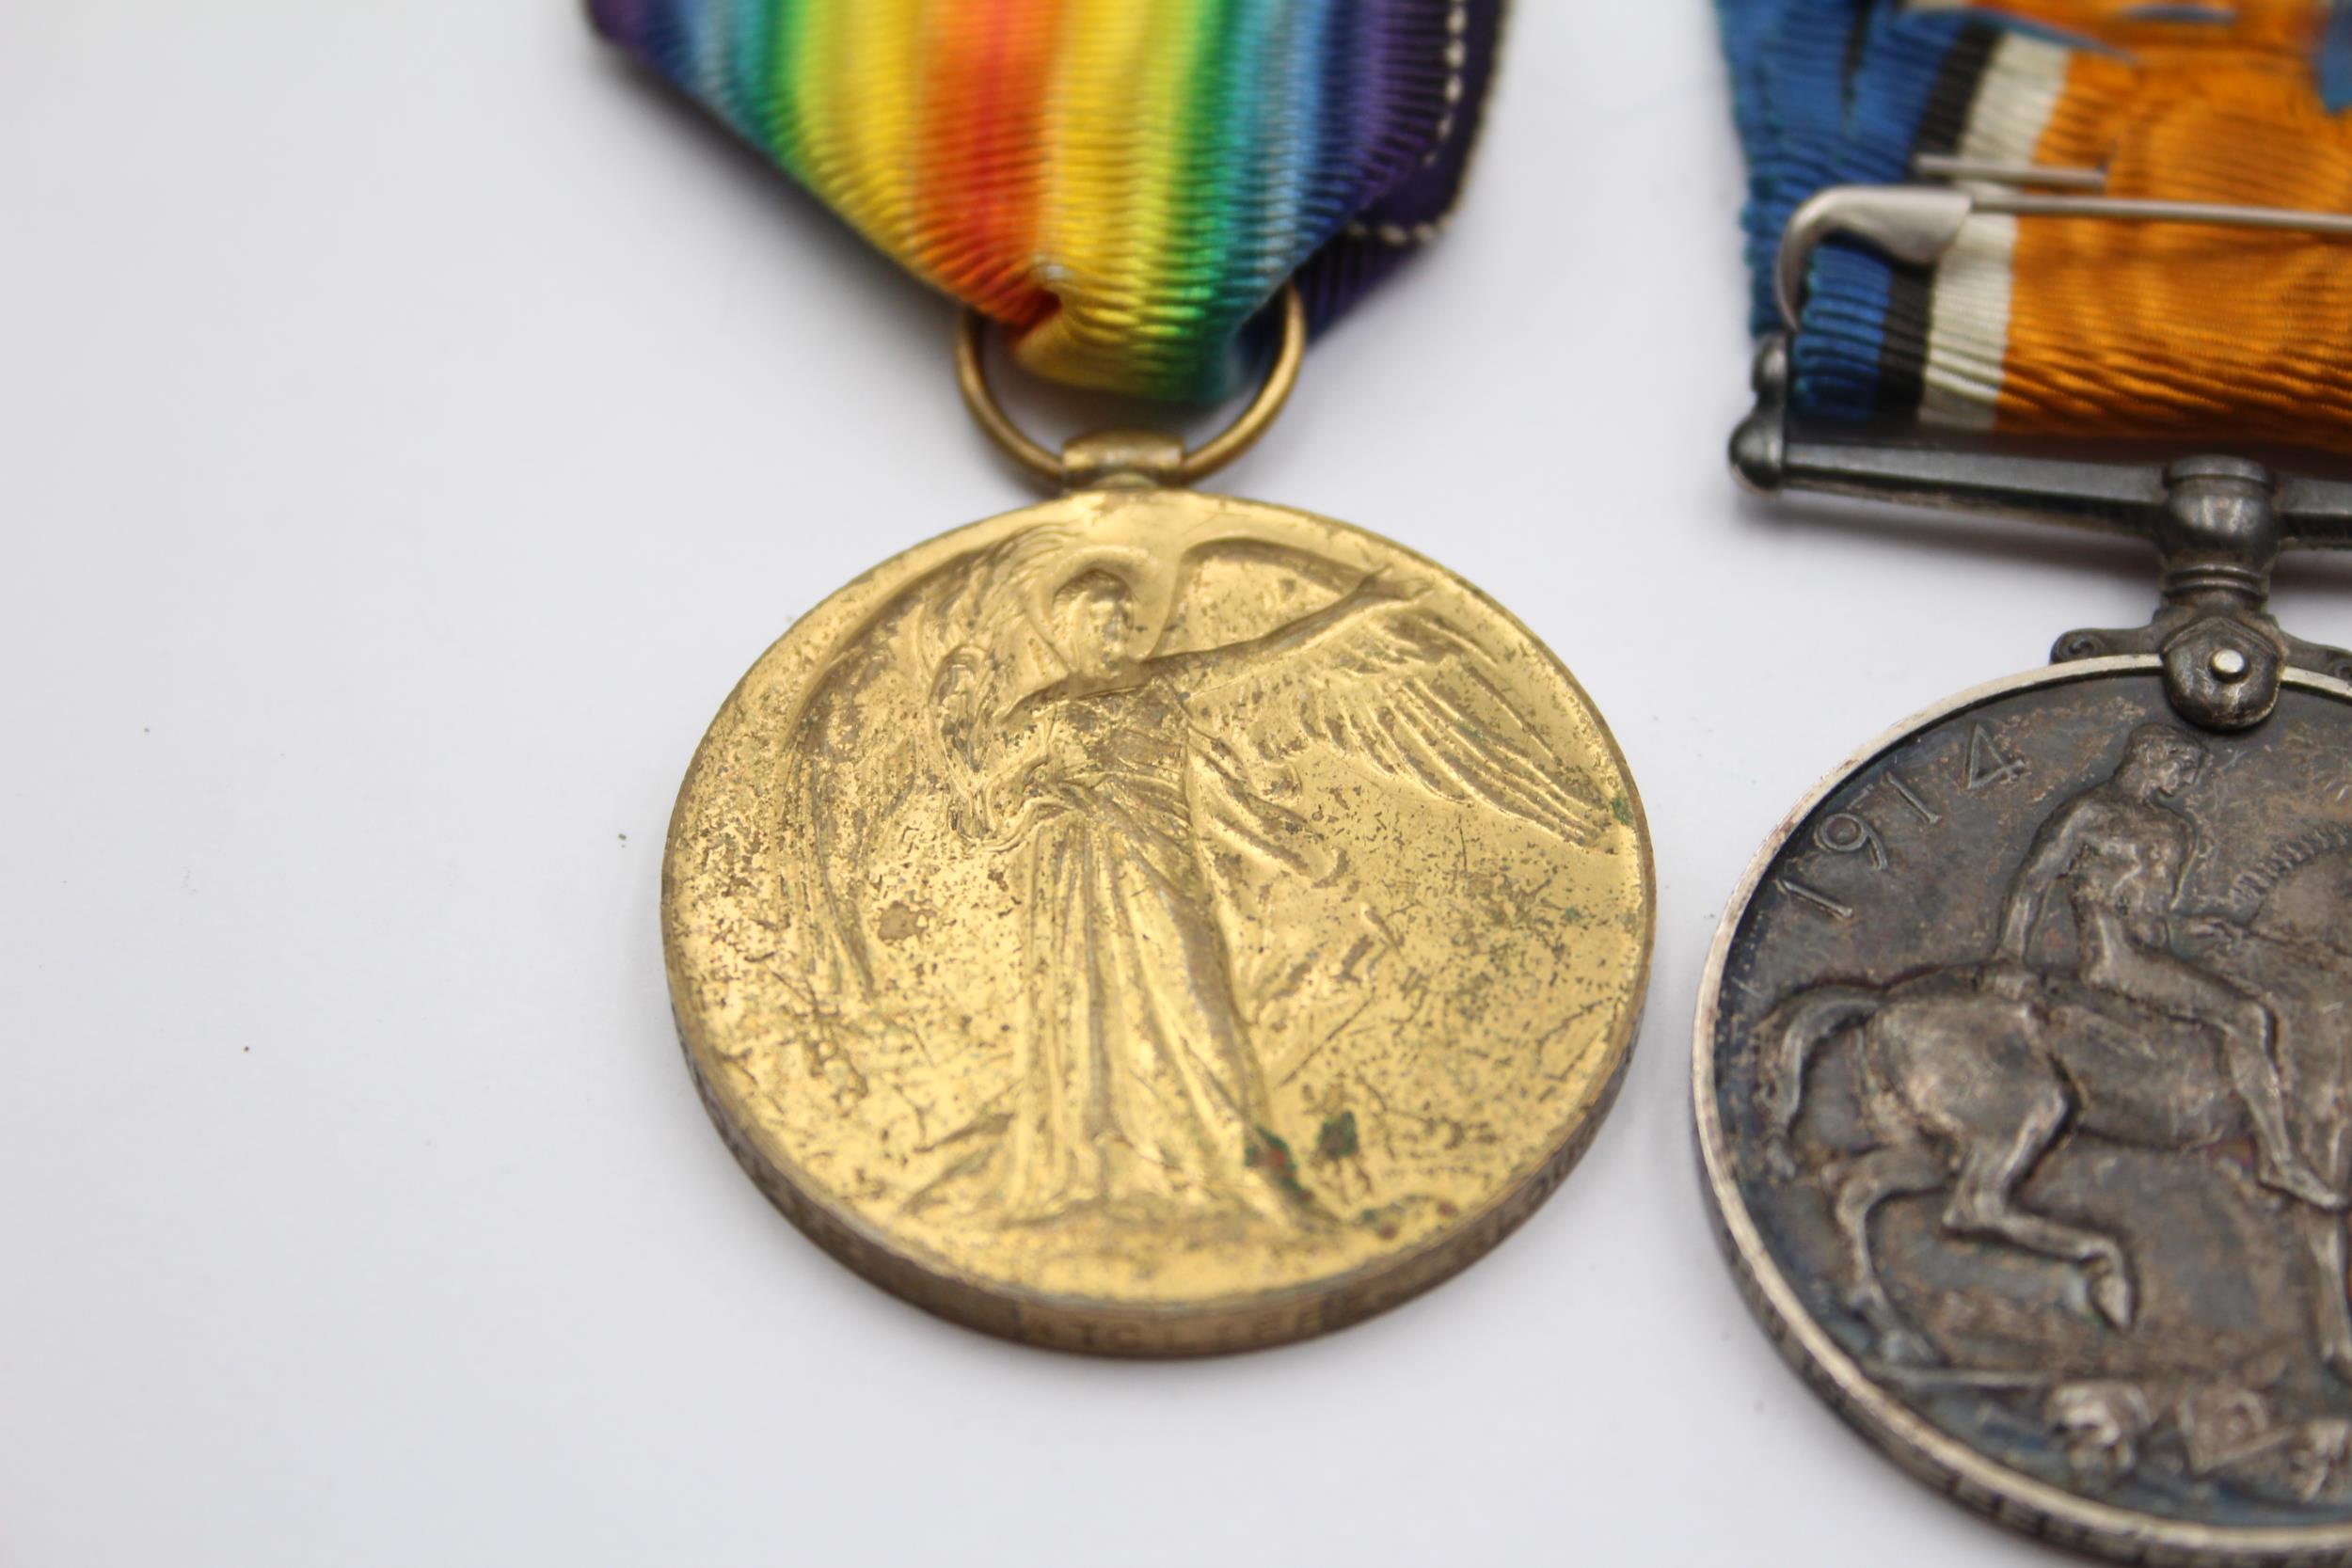 WW1 Firebrigade Medal Group Pair 34290 Pte Ratcliffe Gloster R, Fire 10yr // In antique condition - Image 2 of 5